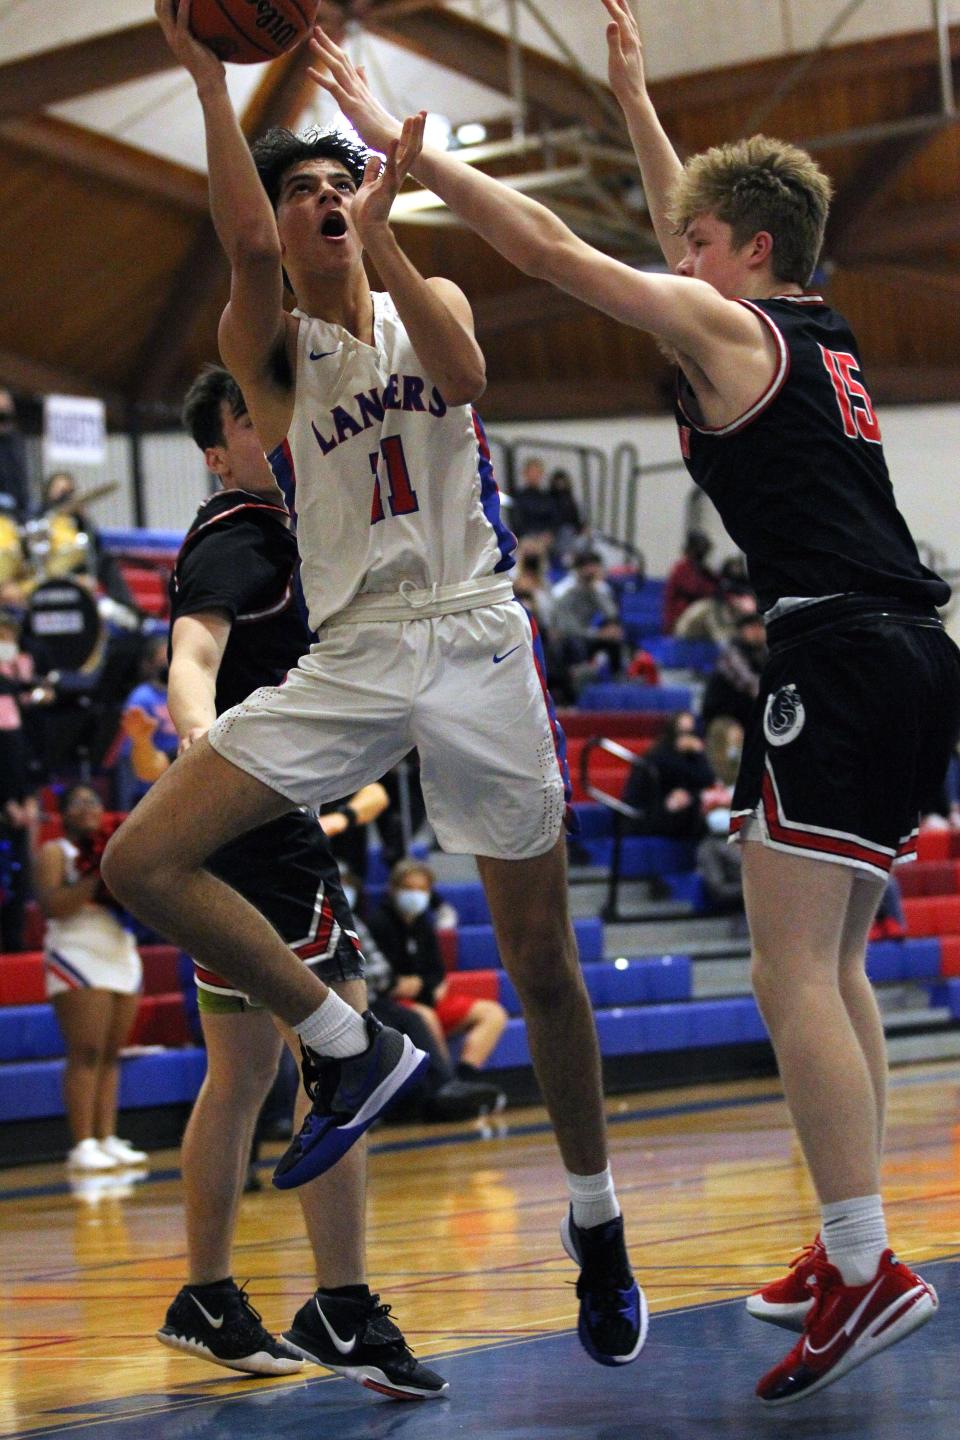 Churchill’s Cooper Case gets off a shot over Thurston’s Nate Stiffler during Friday’s Midwestern League basketball game.